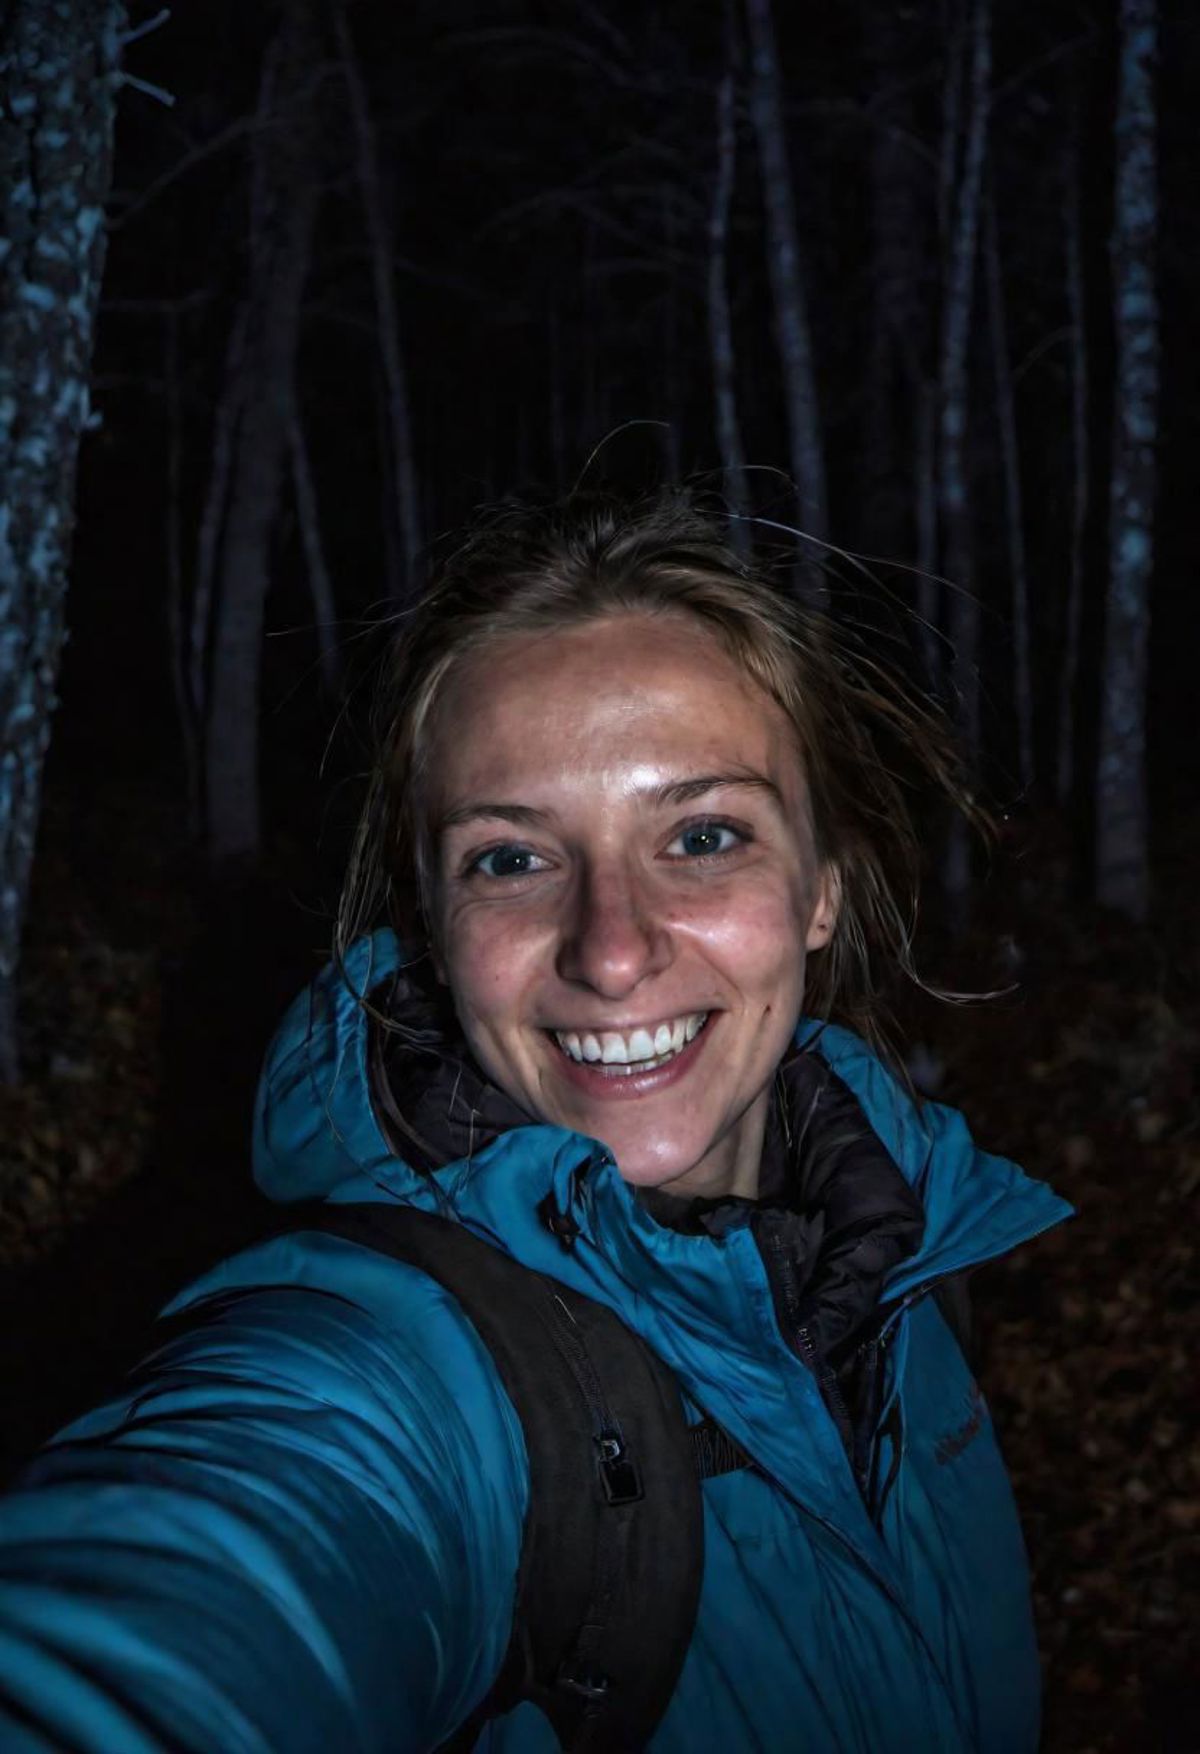 A woman in a blue jacket smiling in the woods.